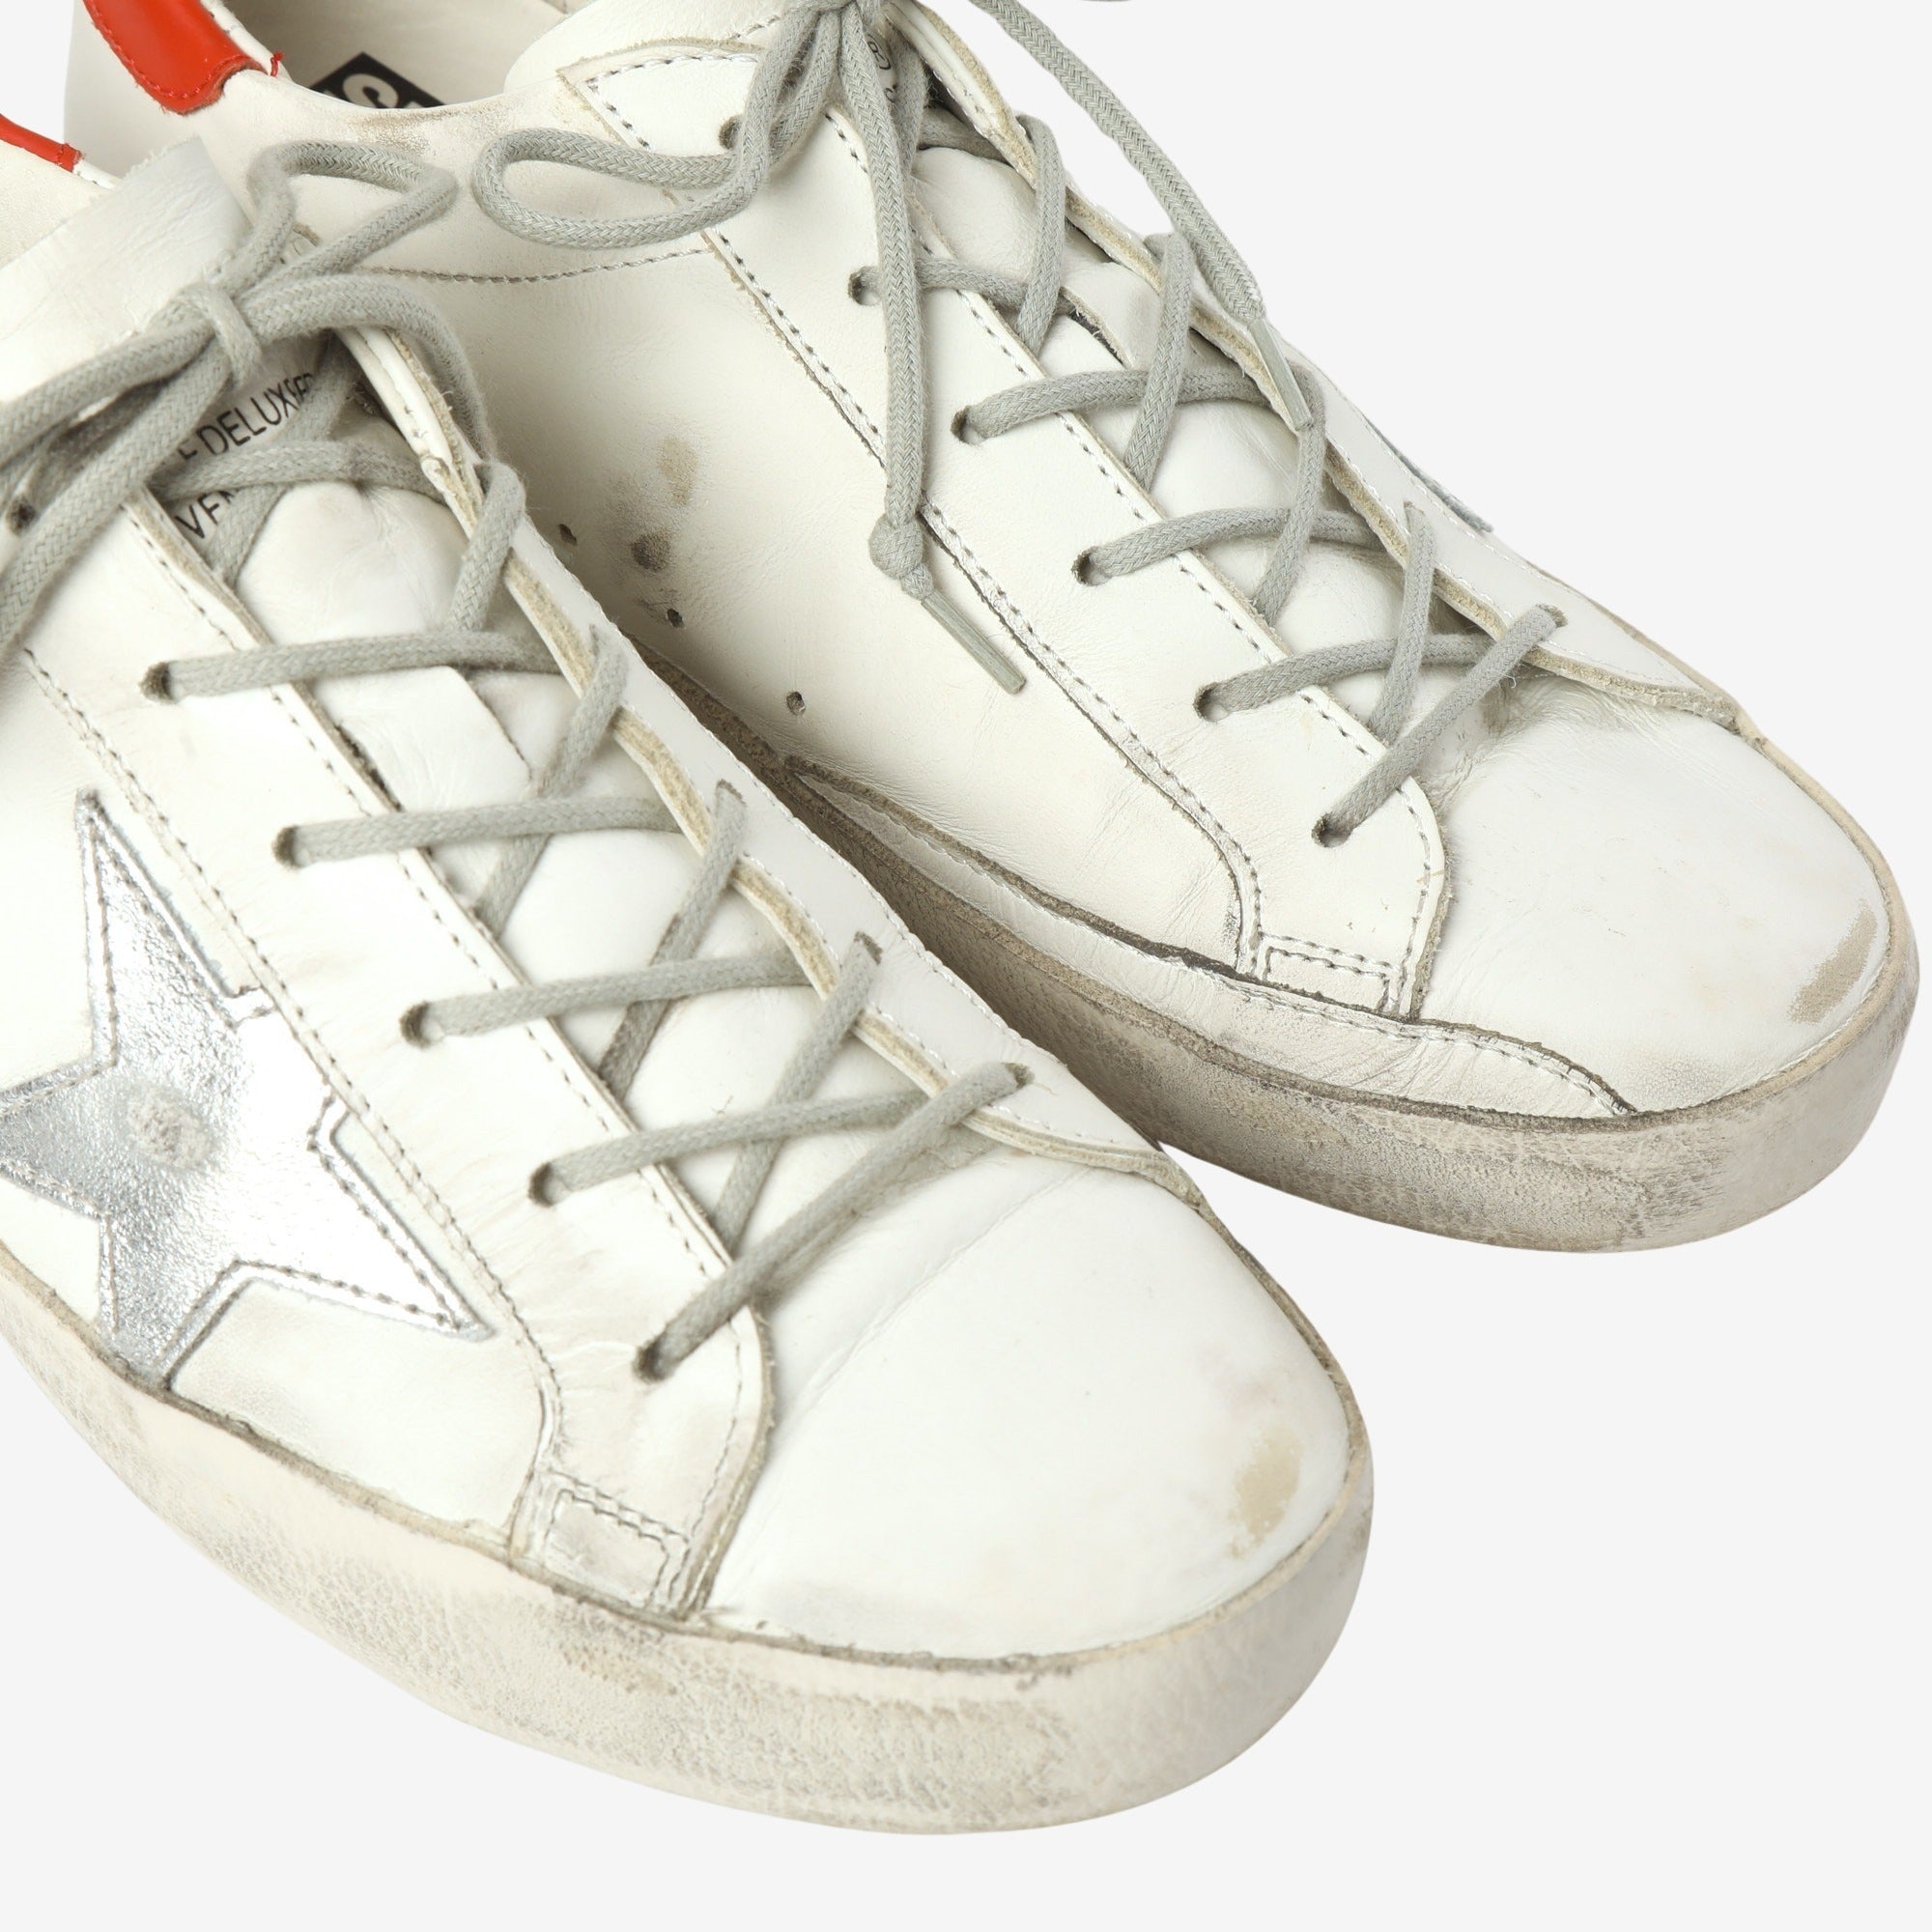 GGDB Super-Star Leather Sneakers